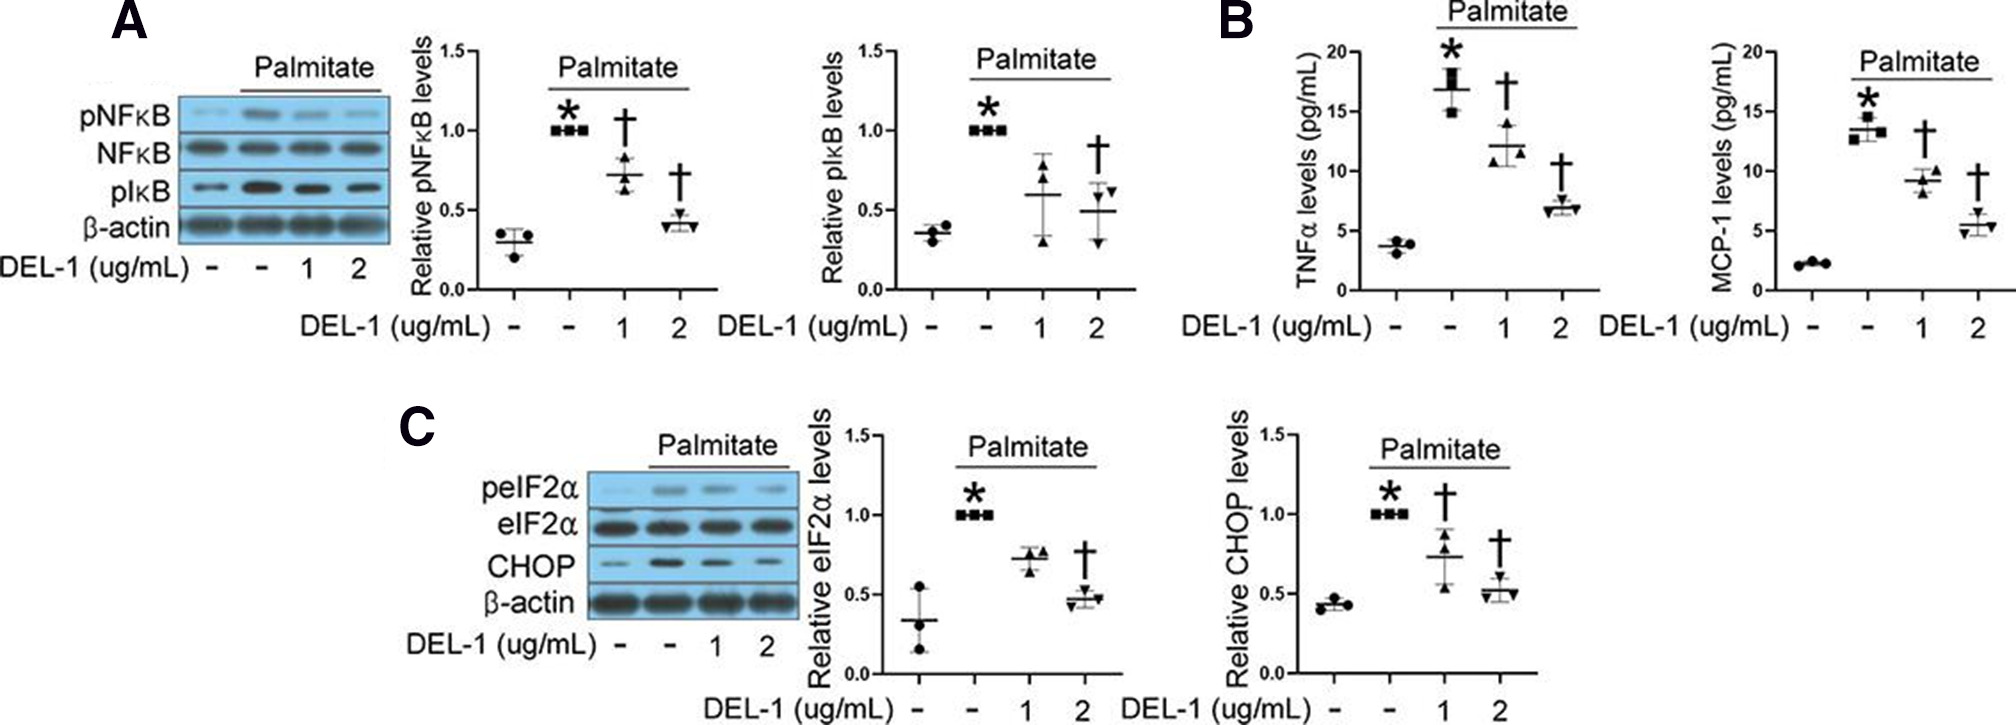 Fig. 2 
            Developmental endothelial locus-1 (DEL-1) suppresses inflammation and endoplasmic reticulum (ER) stress in tenocytes treated with palmitate. a) Western blotting of NFκB and IκB phosphorylation in tenocytes treated with palmitate (400 μM) and DEL-1 (0 to 2 μg/ml) for 24 hours. b) Enzyme-linked immunosorbent assay for determining tumour necrosis factor alpha (TNFα) and monocyte chemoattractant protein-1 (MCP-1) concentrations in the culture medium of tenocytes treated with palmitate (400 μM) and/or DEL-1 (0 to 2 μg/ml) for 24 hours. c) Western blotting of eIF2α phosphorylation and CHOP expression in tenocytes treated with palmitate (400 μM) and/or DEL-1 (0 to 2 μg/ml) for 24 hours. Means and standard deviations were calculated from three independent experiments. Significance (p < 0.05). *: vs control. †: vs palmitate.
          